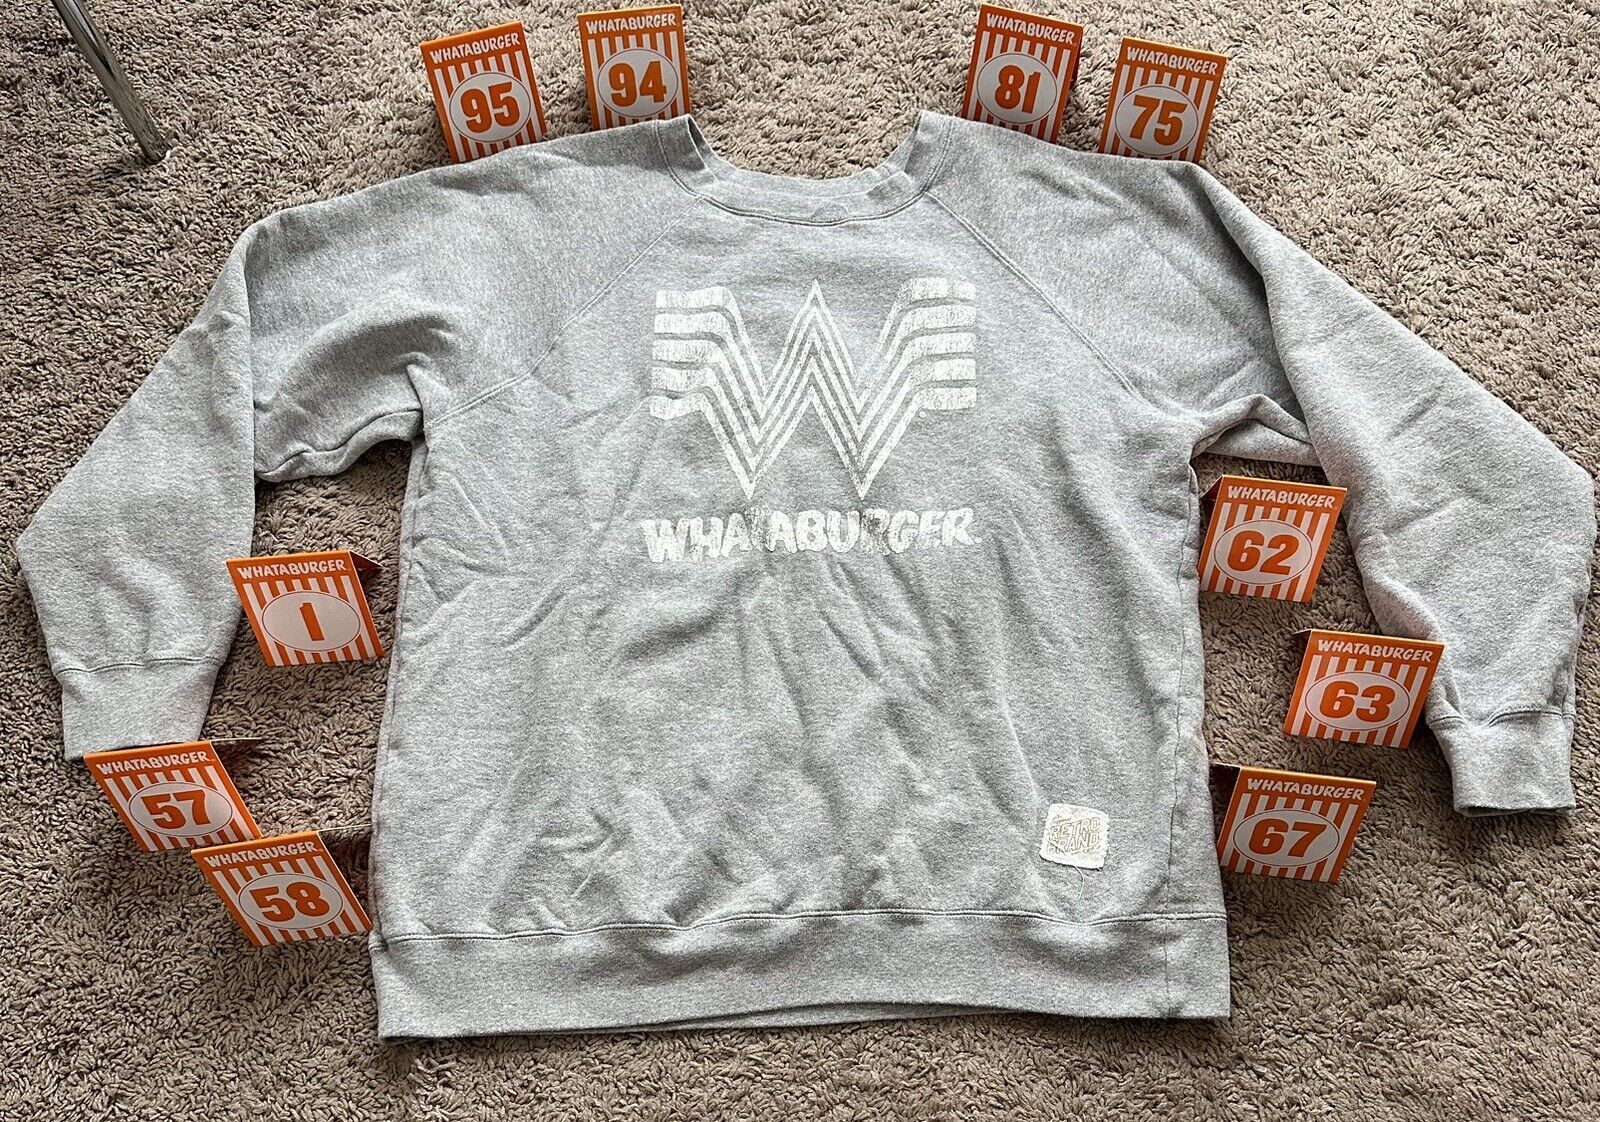 Whataburger Table Tents and Retro Brand Crewneck Size Large